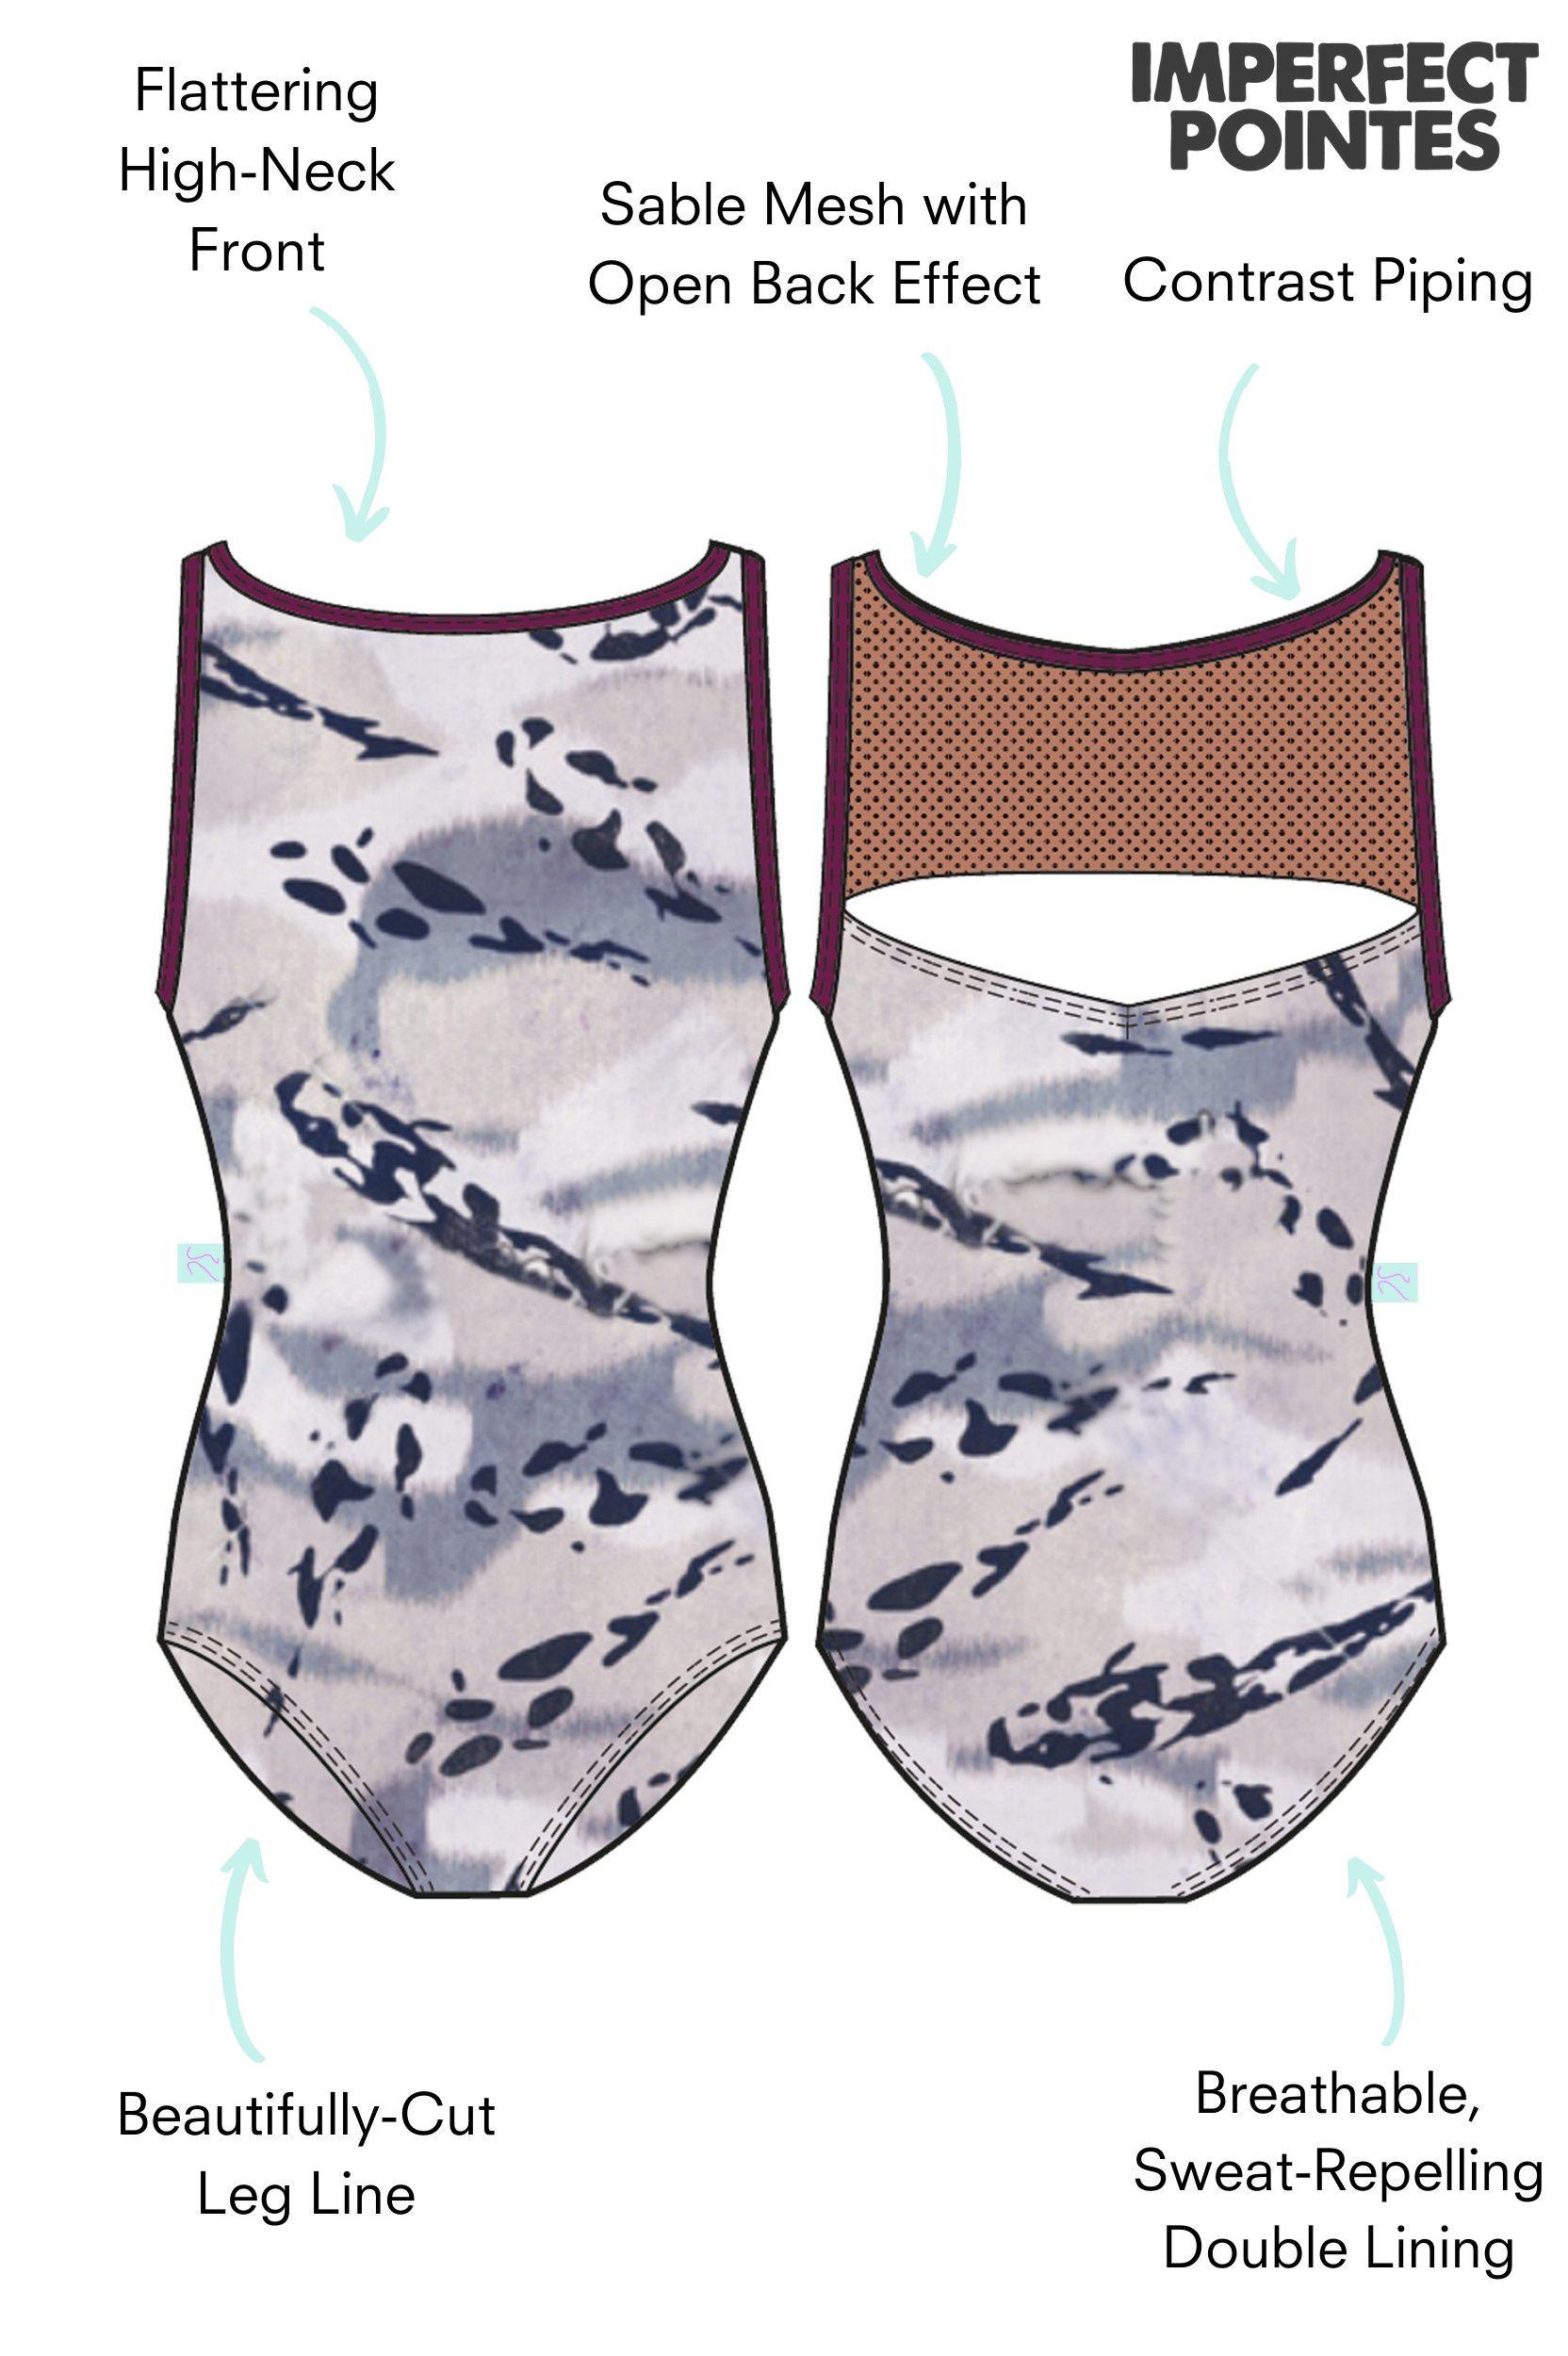 Women's Cilicia Leotard - Camufish Print with Sable Mesh-Women's Leotard-XS-Imperfect Pointes